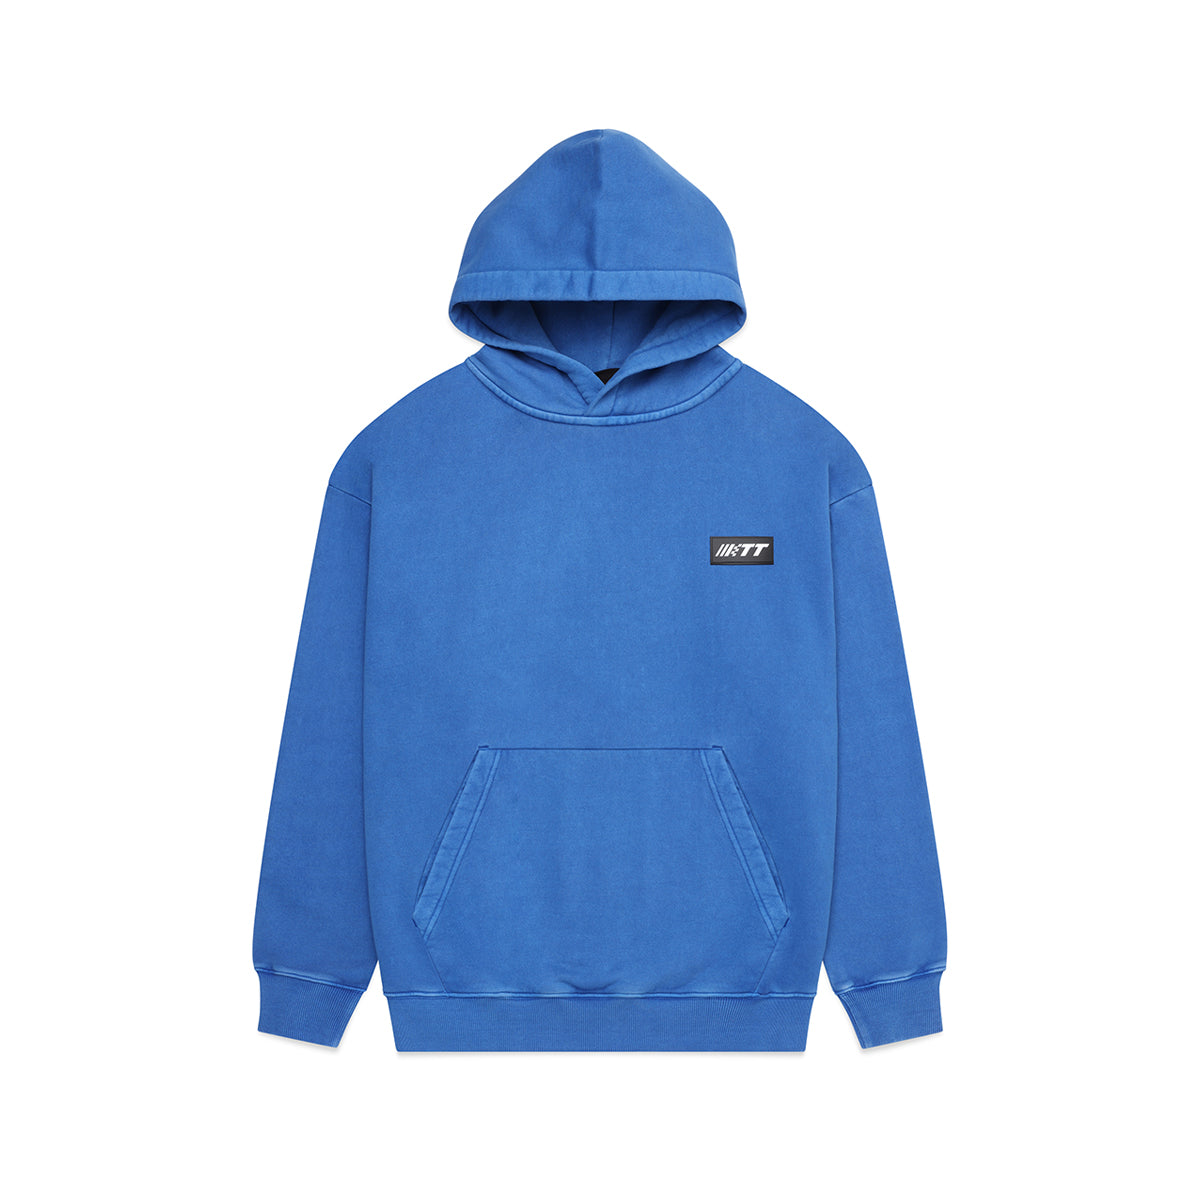 Turbo Threads Pigment Blue Box Fit Hoodie with small black and white Turbo Threads logo